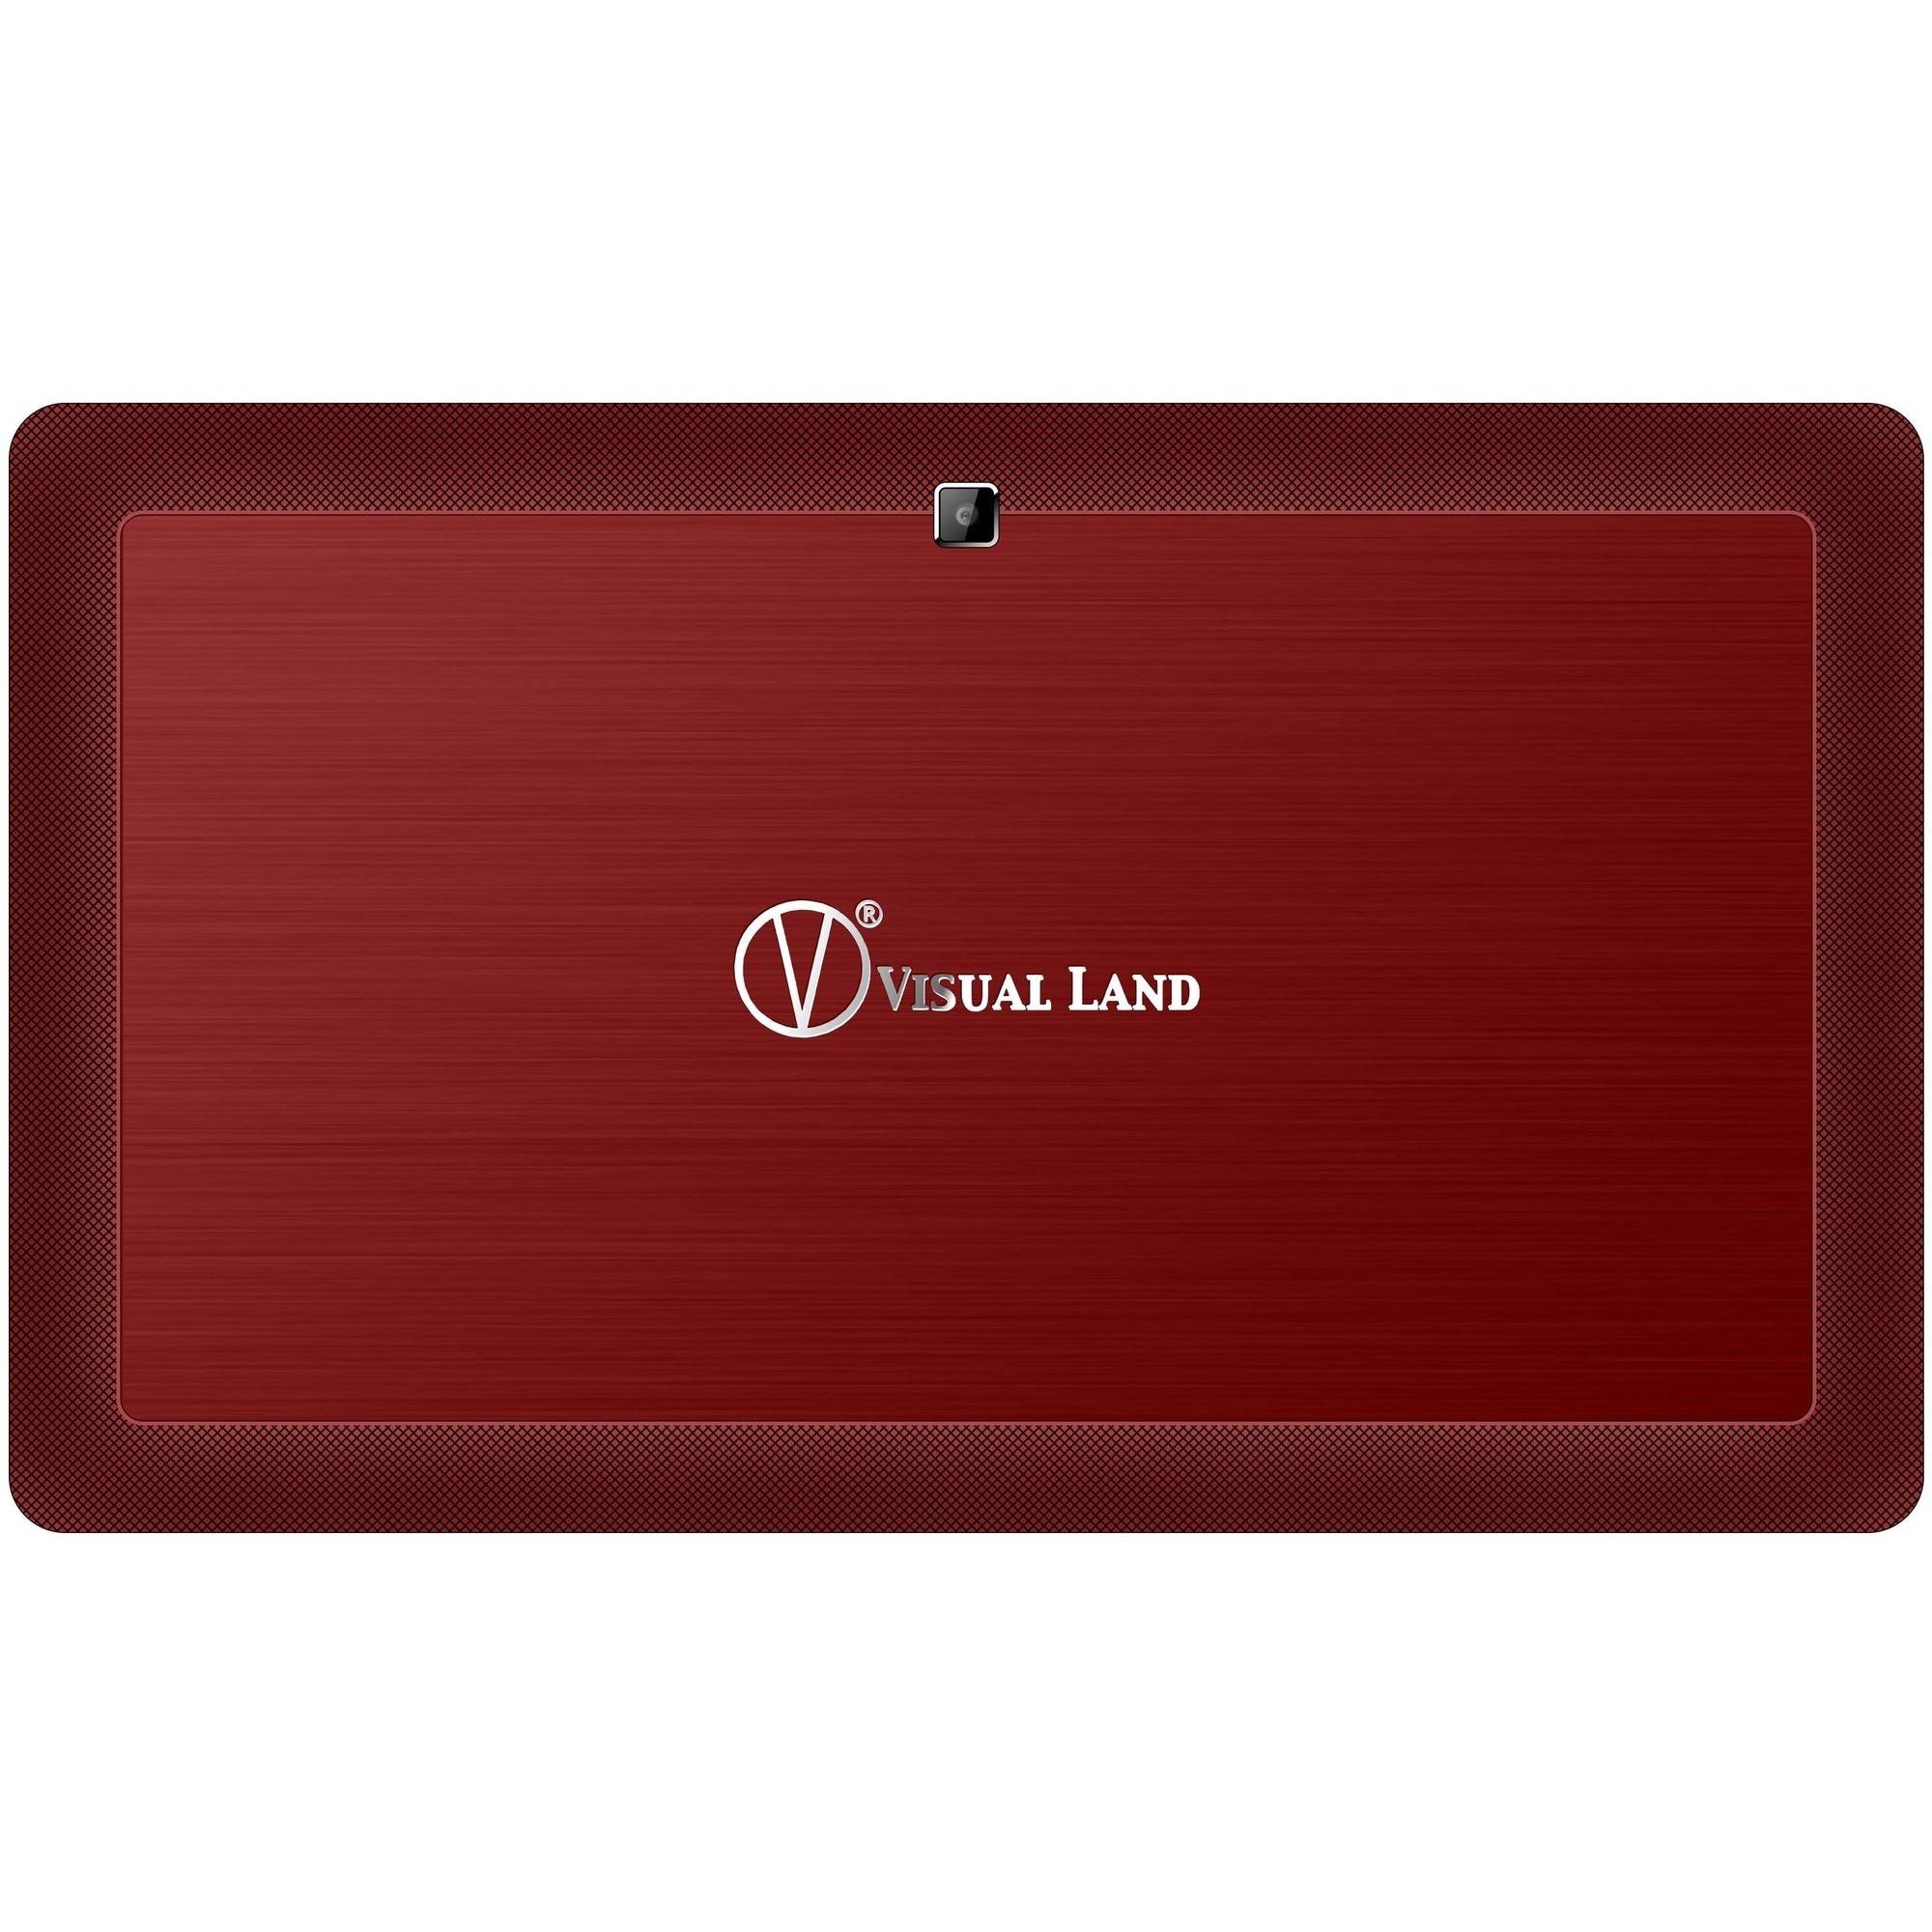 Visual Land 13.3" IPS QuadCore [2-In-1] Tablet 64GB includes Docking Keyboard Case, Android 5.1 Lollipop - image 3 of 4